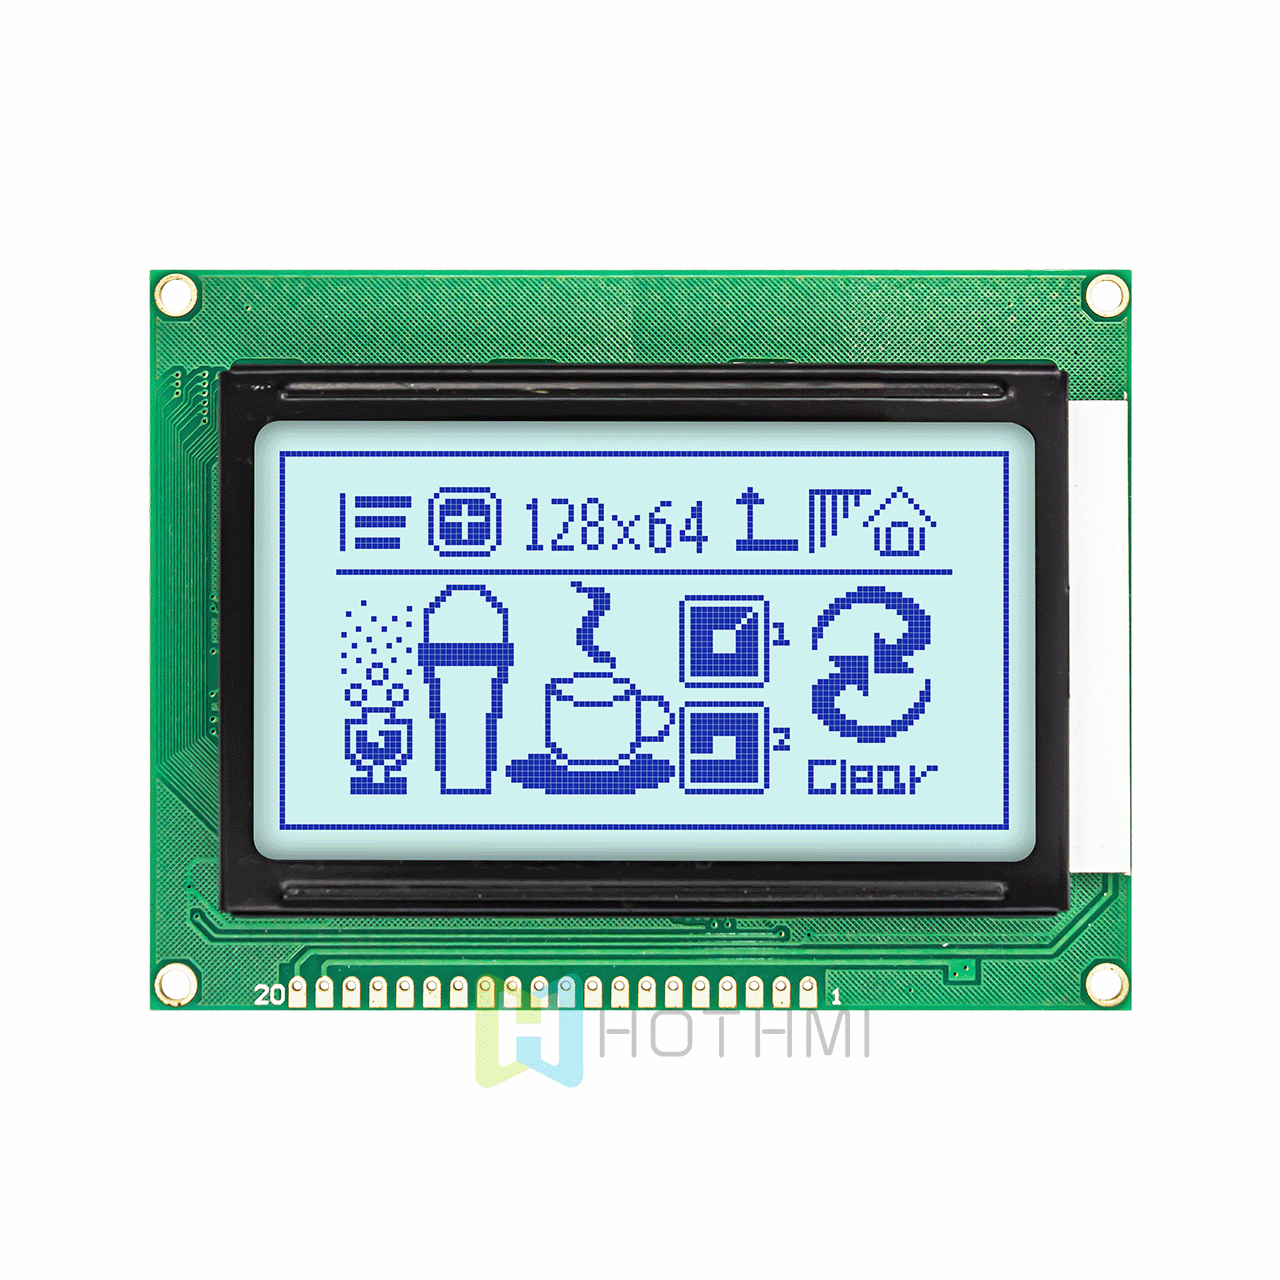 3.2-inch low-costwhite backlight | 128x64 graphic LCD module | ST7920 | MCU interface | for Arduino